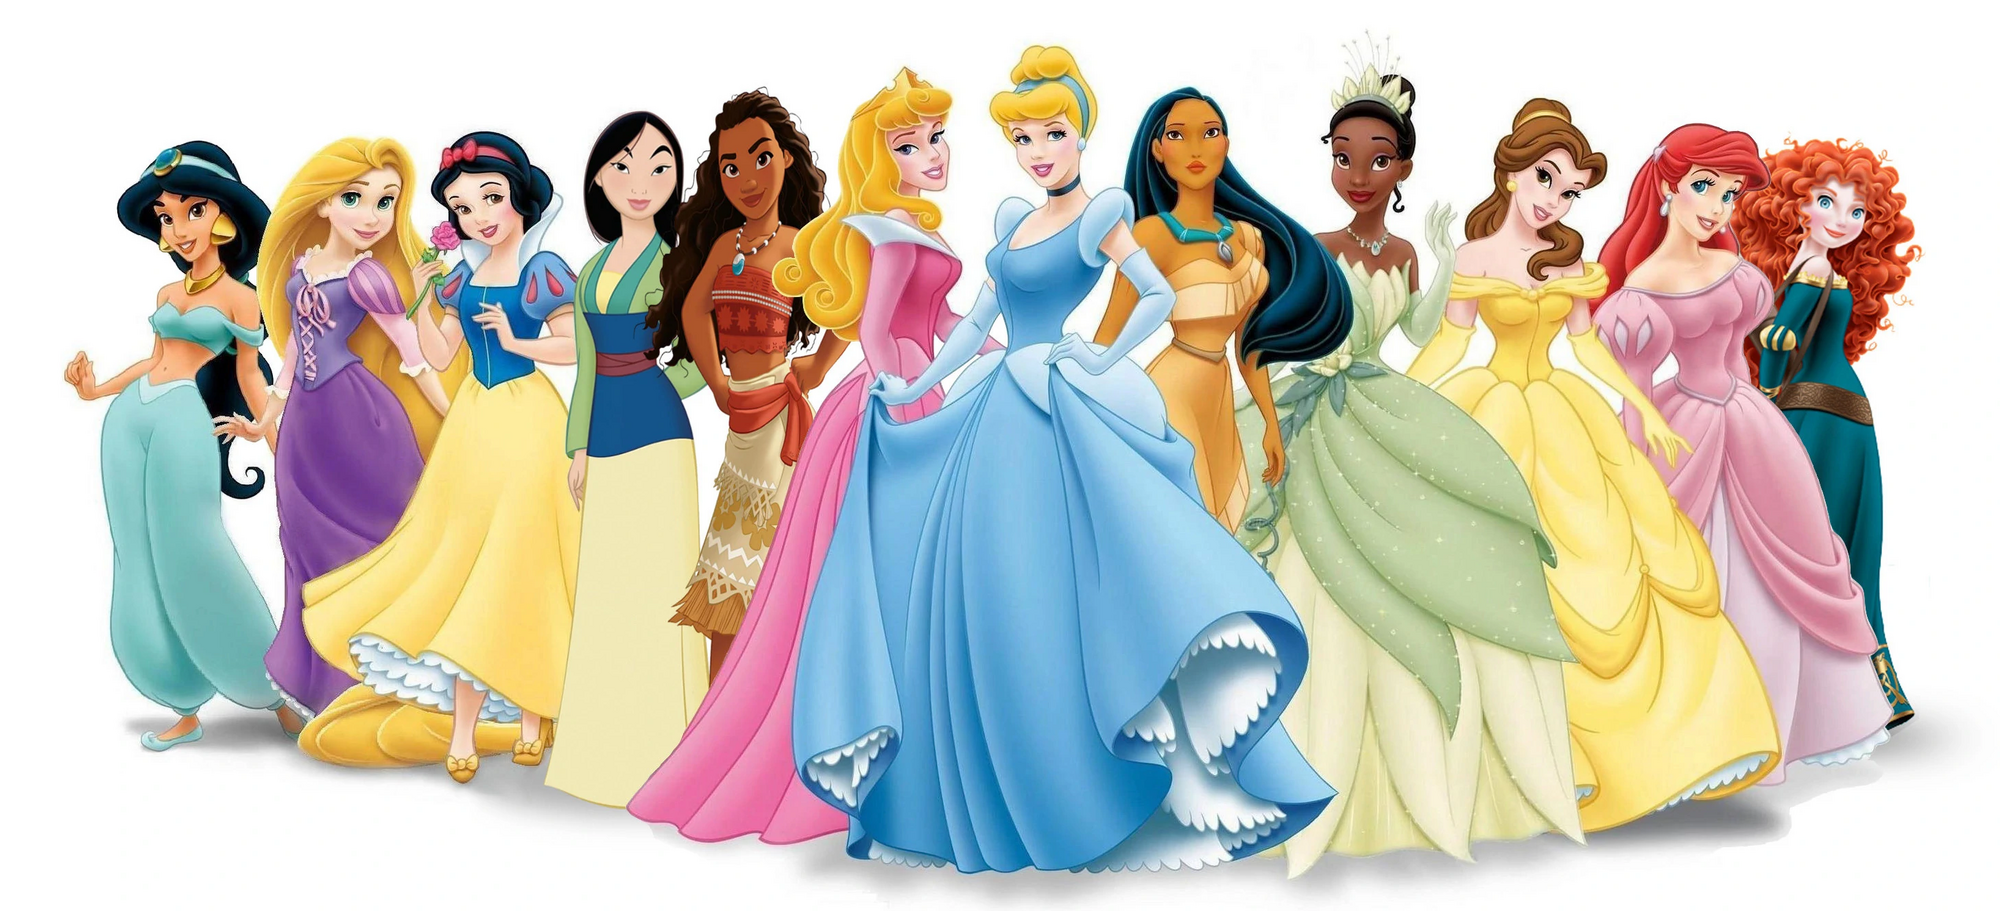 Disney Princess Ariel Shemale Porn Big - 30 Surprising and Fun Facts About Disney's Princesses - AllEars.Net